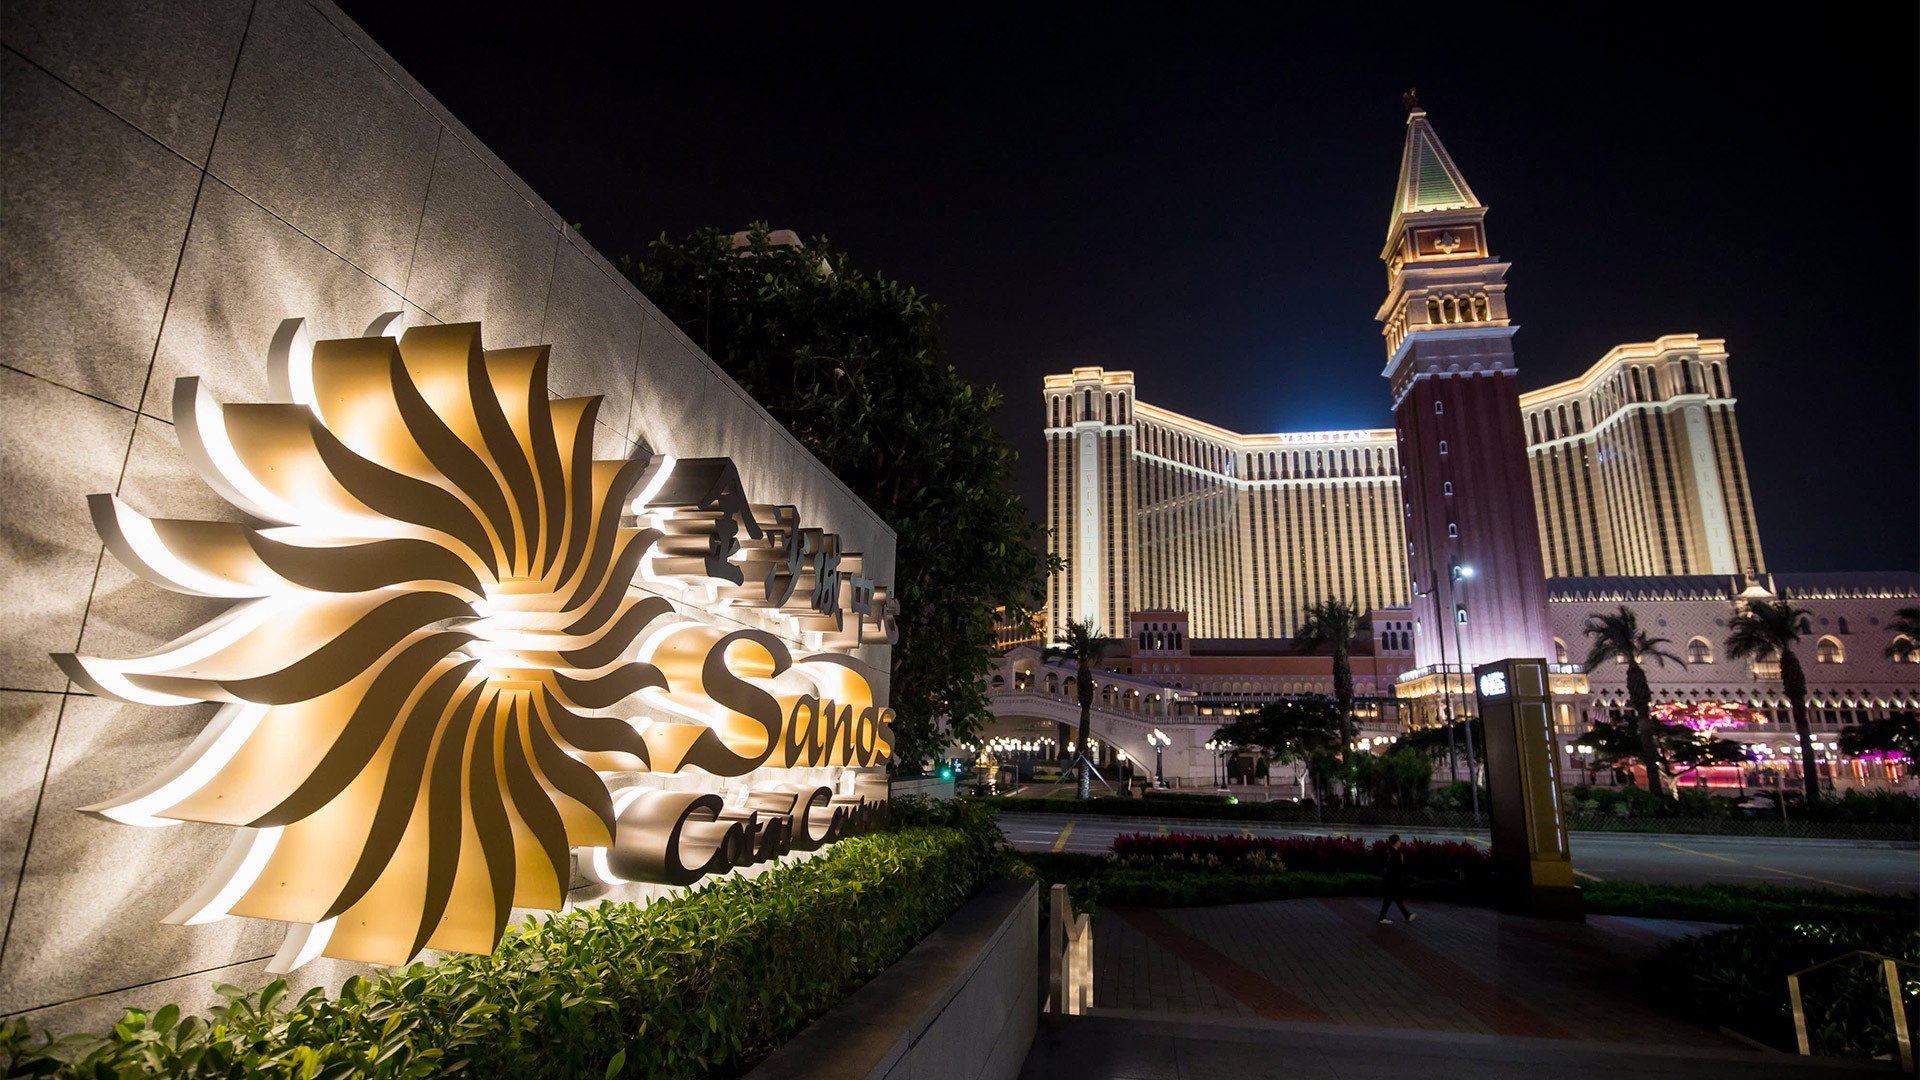 Sands' revenue continues downward trend in Q2 amid Covid restrictions in Macau, but Singapore rebounds